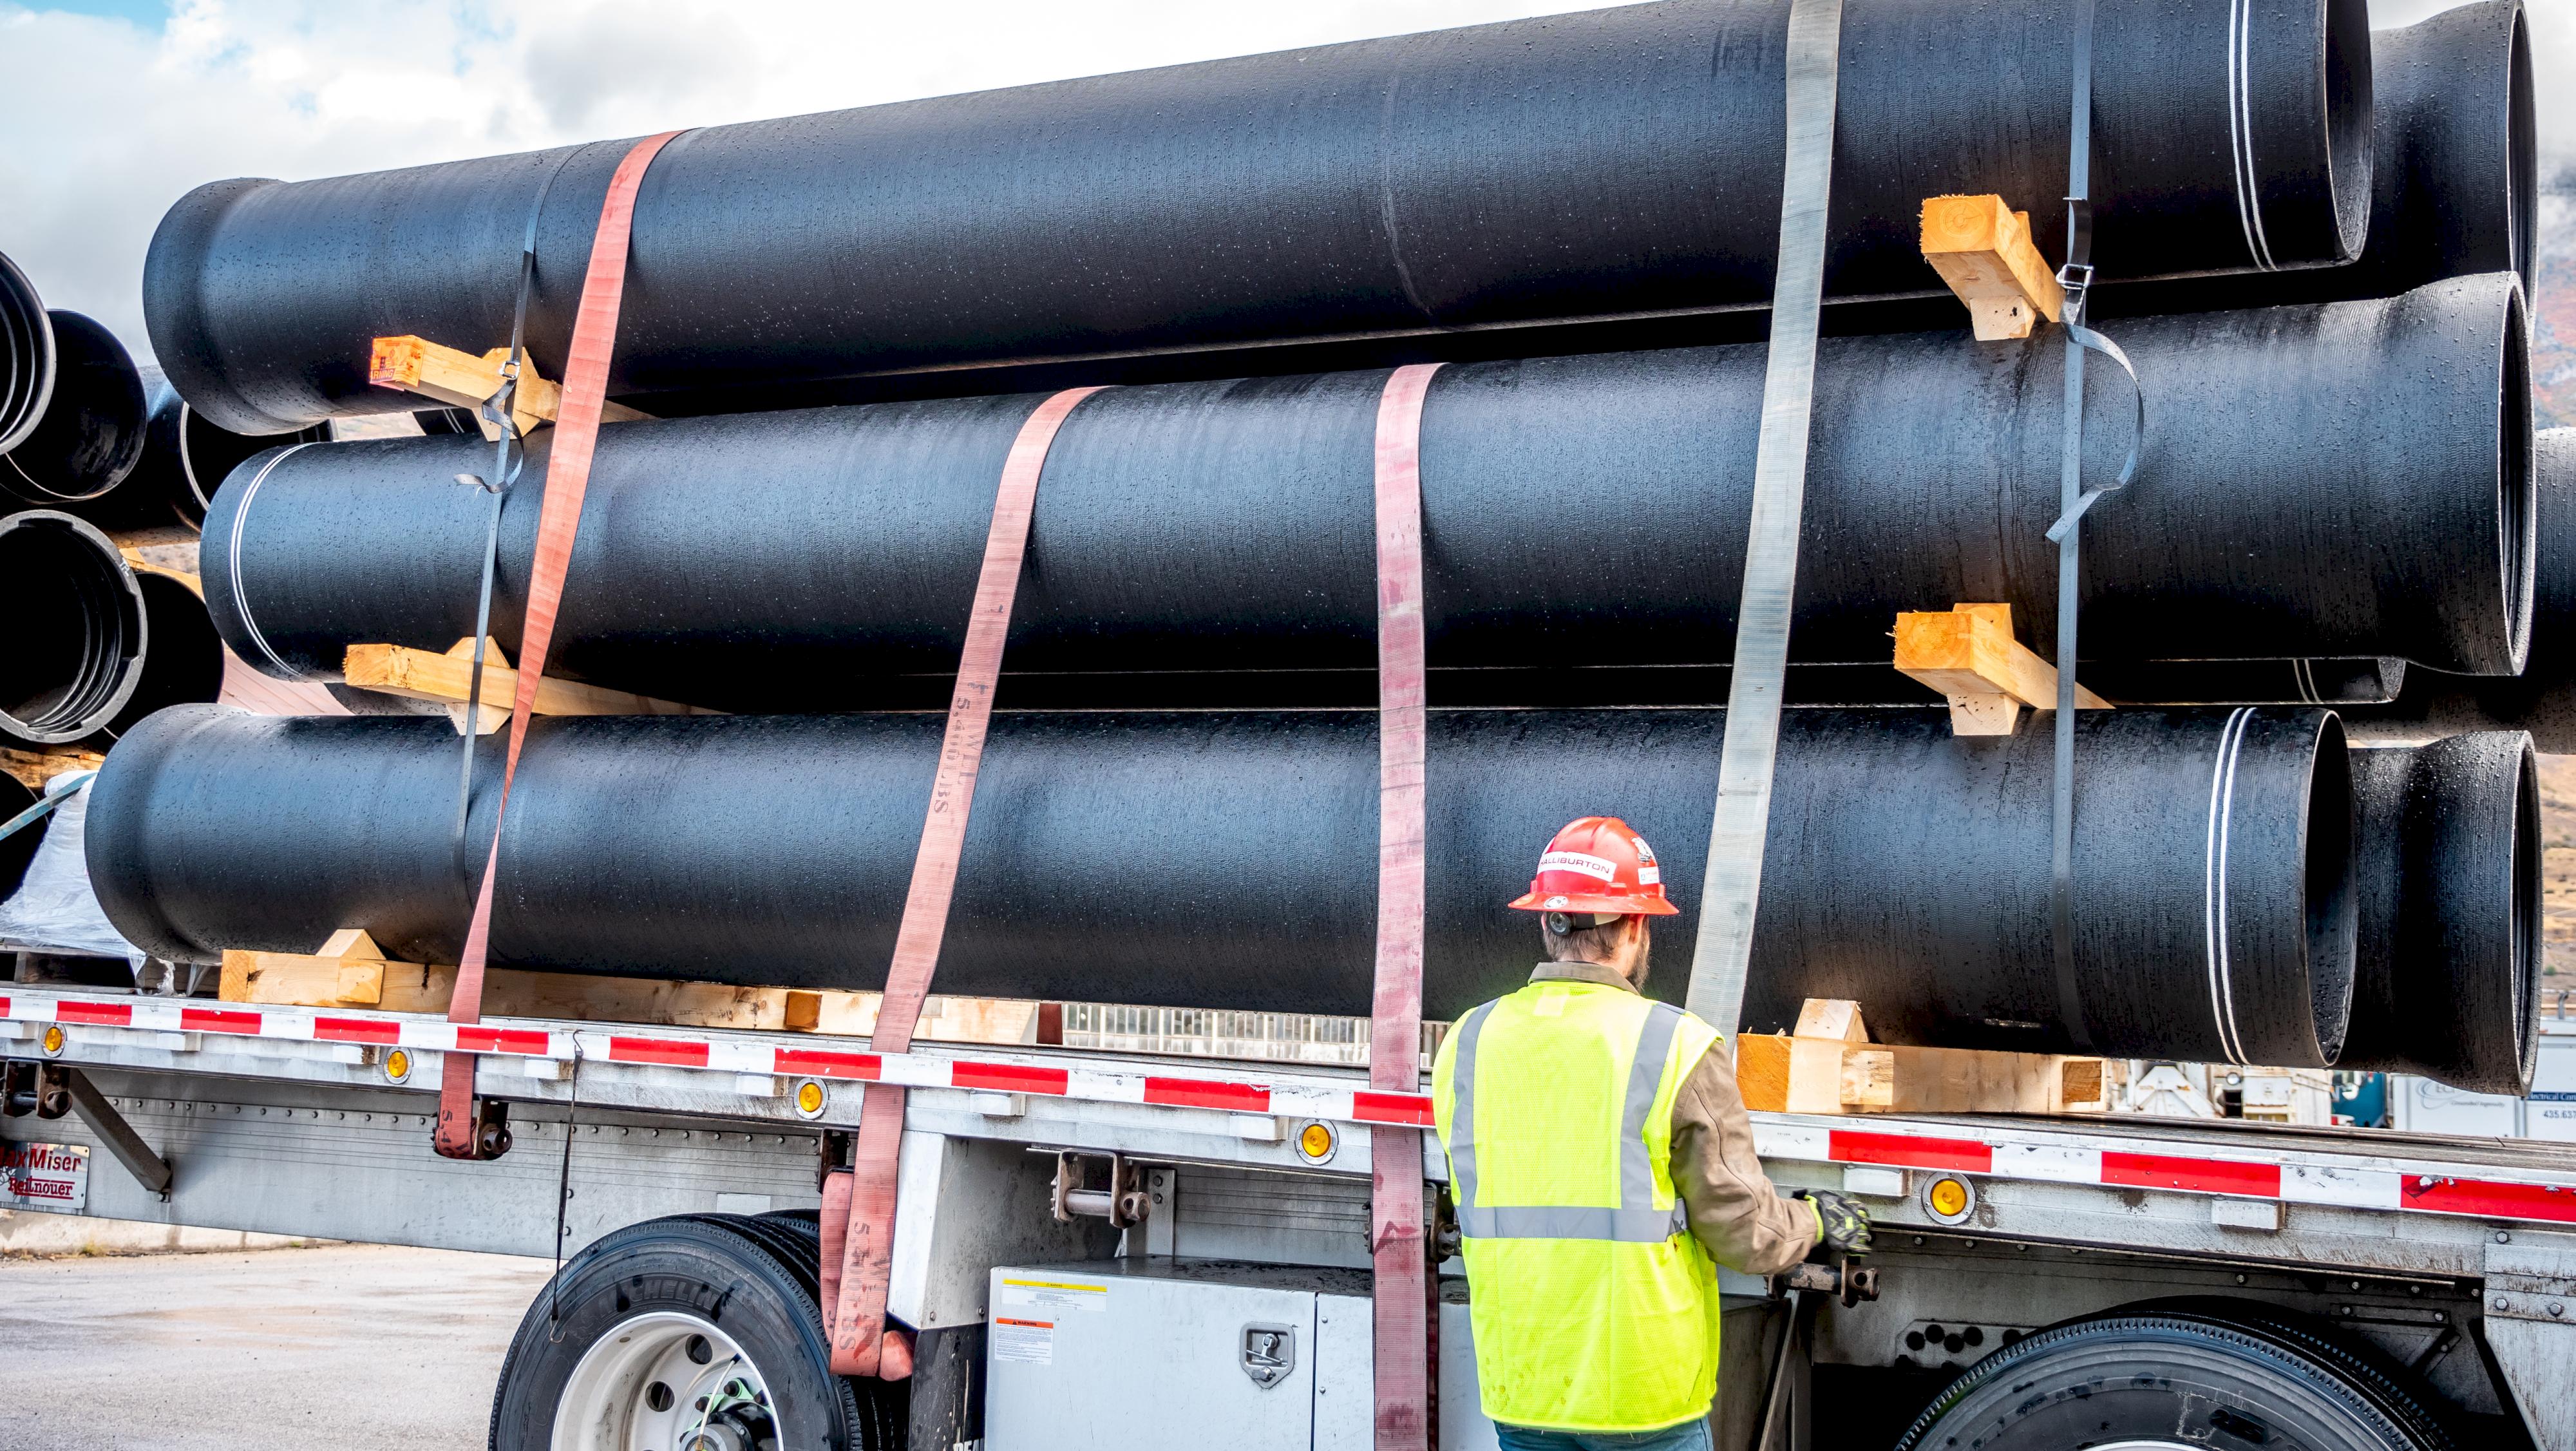 Why Consider A Domestic Only Ductile Iron Pipe Specification? - McWane